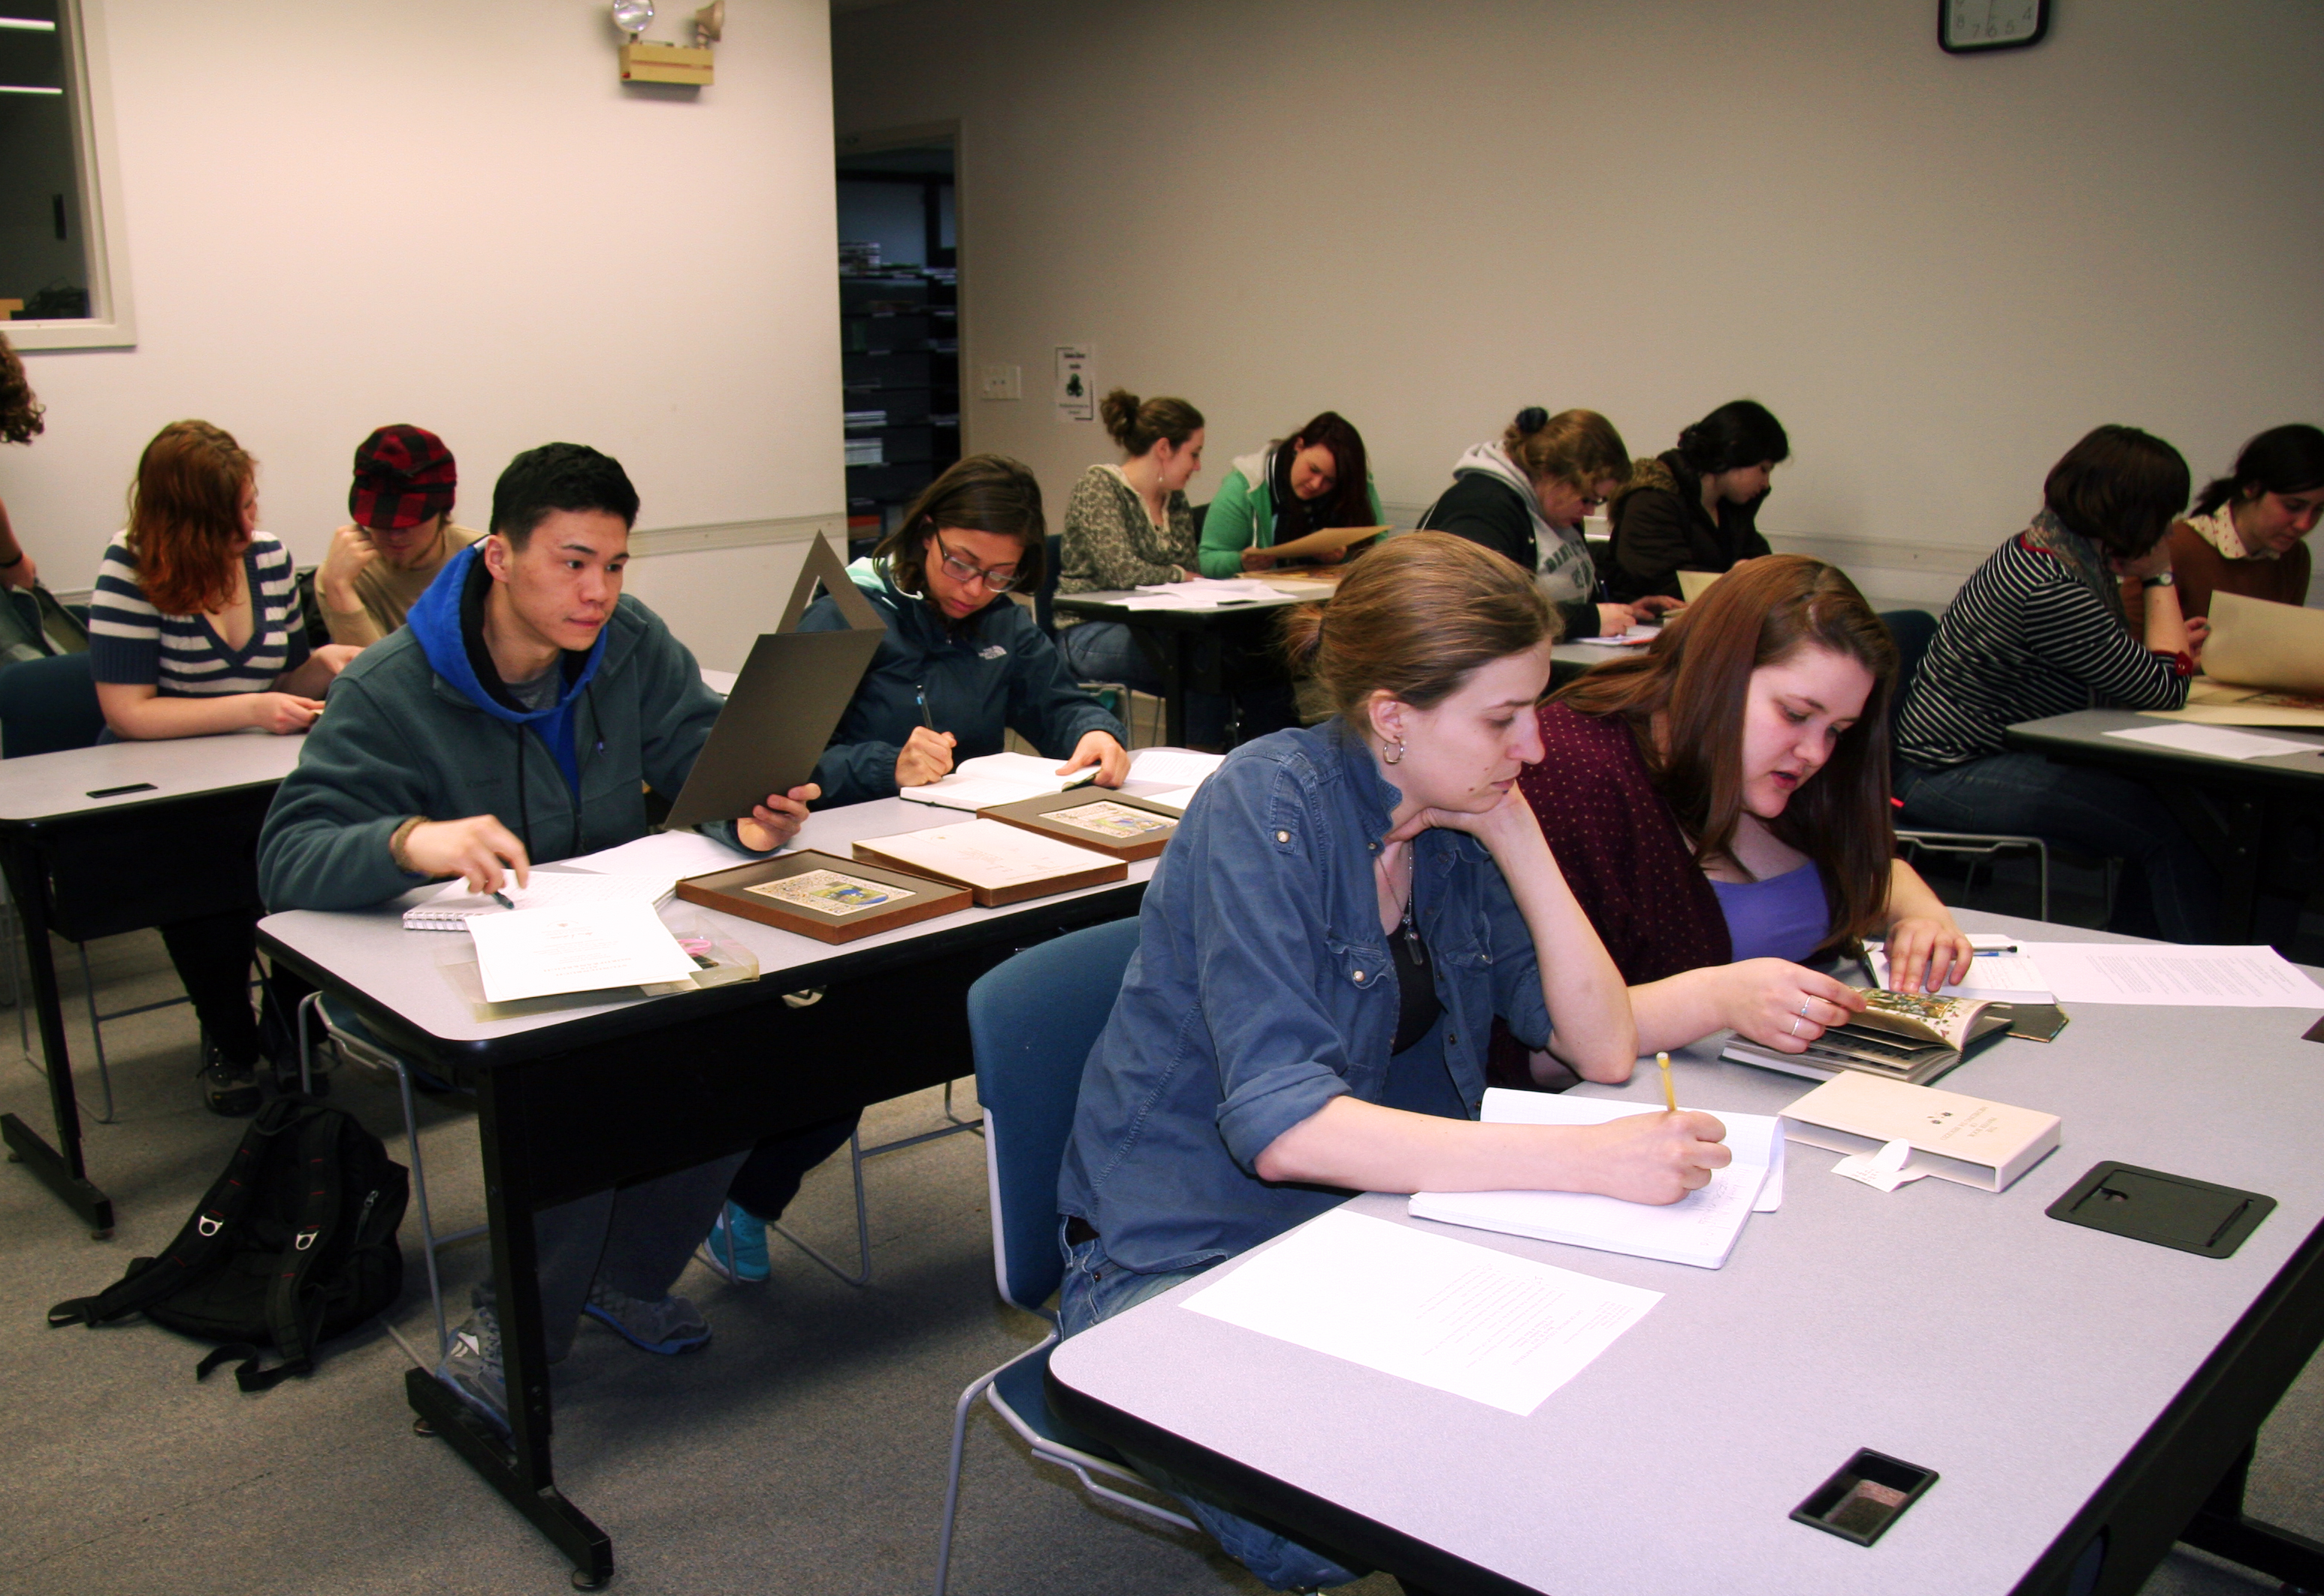 Students working with some of our manuscript facsimiles.